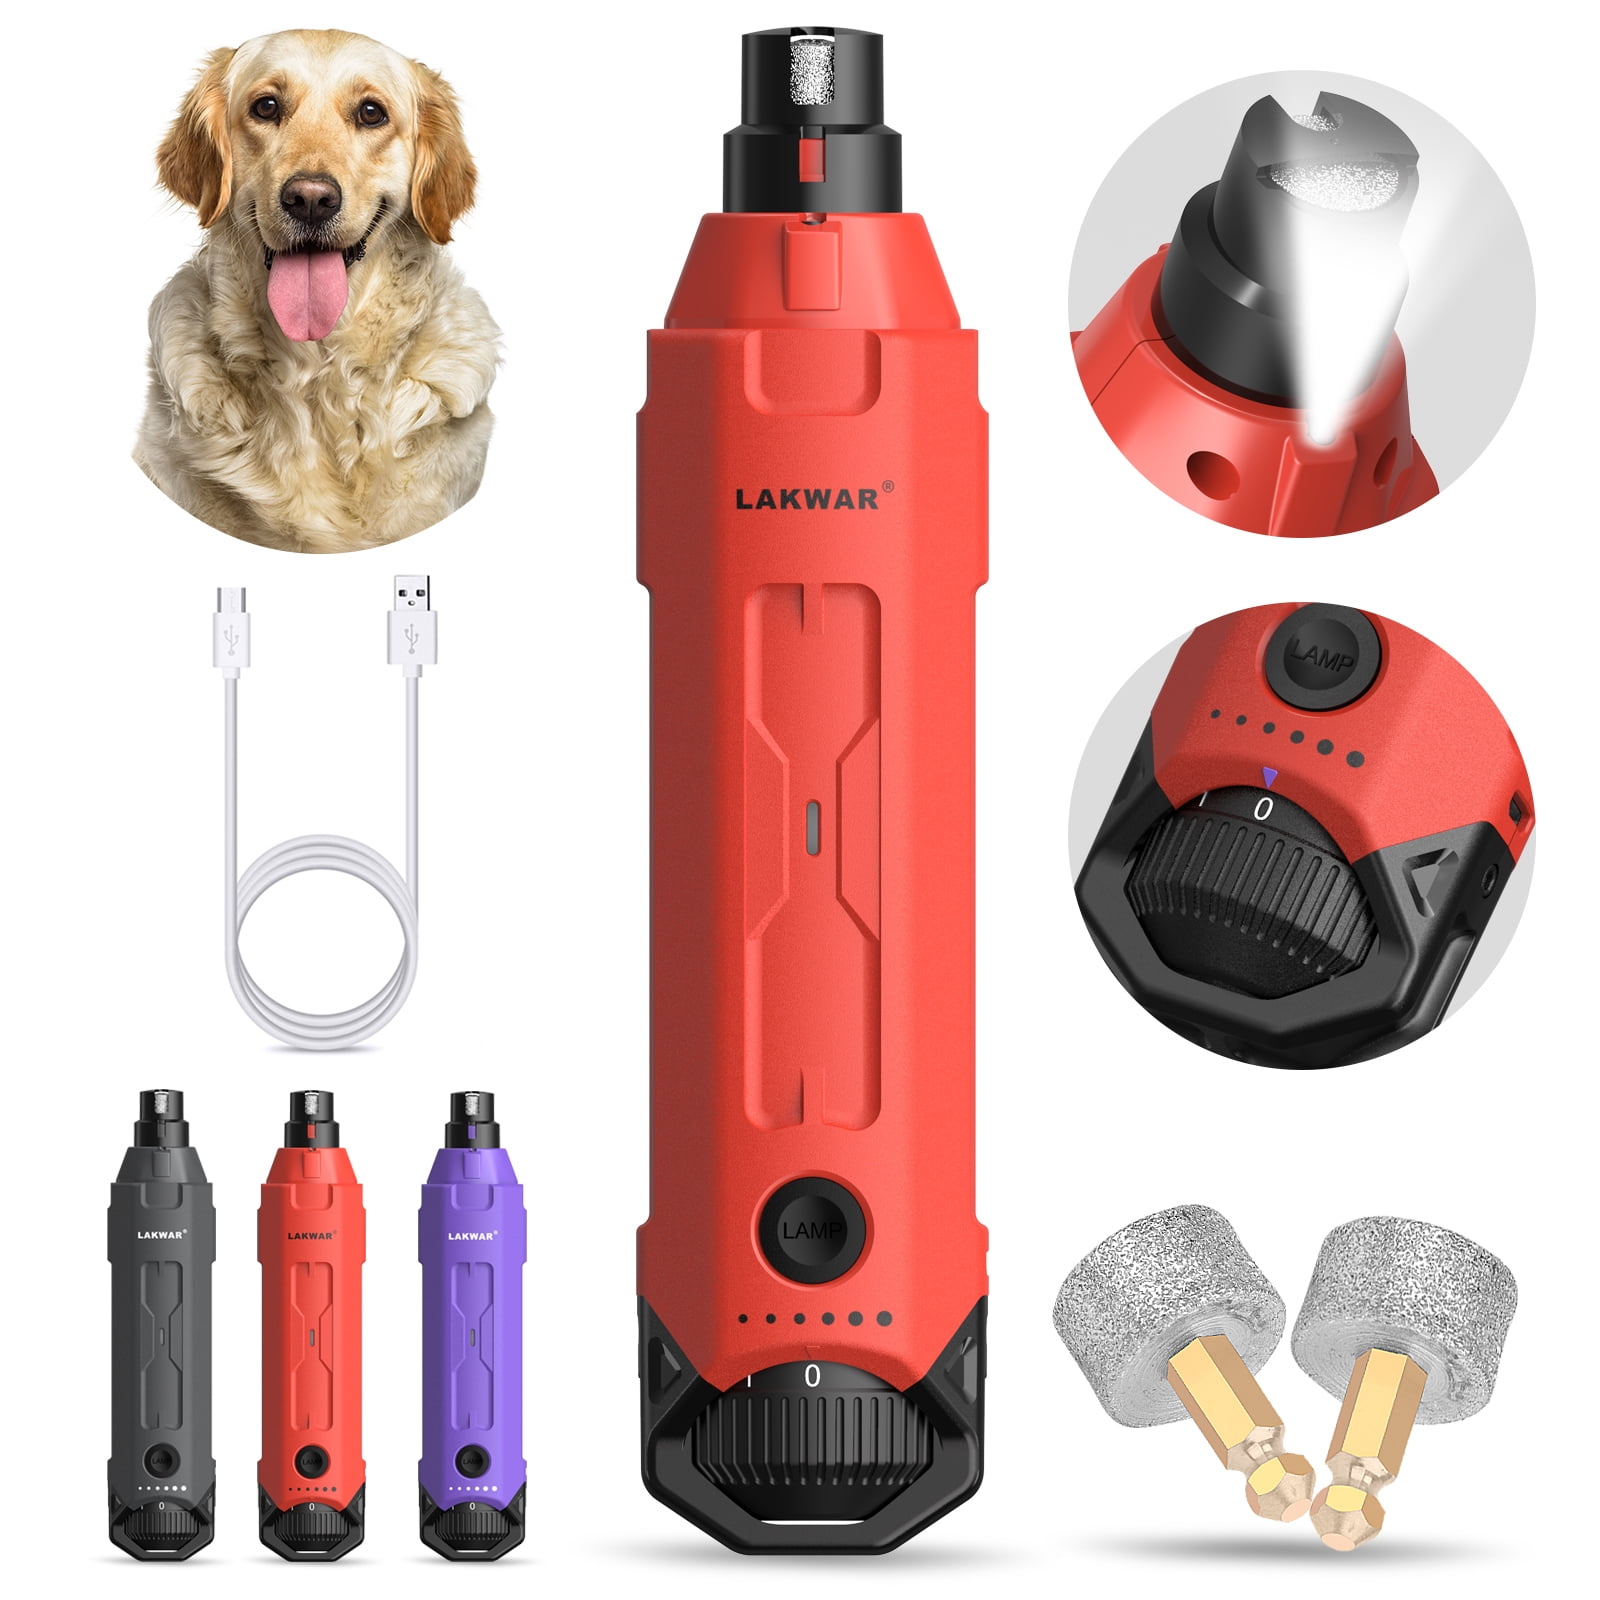 LAKWAR Dog Nail Grinder 6 Speed Pet Grinder W Light Quiet Rechargeable Electric Trimmer Painless Paws Grooming Smoothing Tool Large Medium Small Dogs d39e22e5 cde0 4b1f 82e1 bd4e795a26b4.b1baa2611da03d388621b7a8a6337bb4